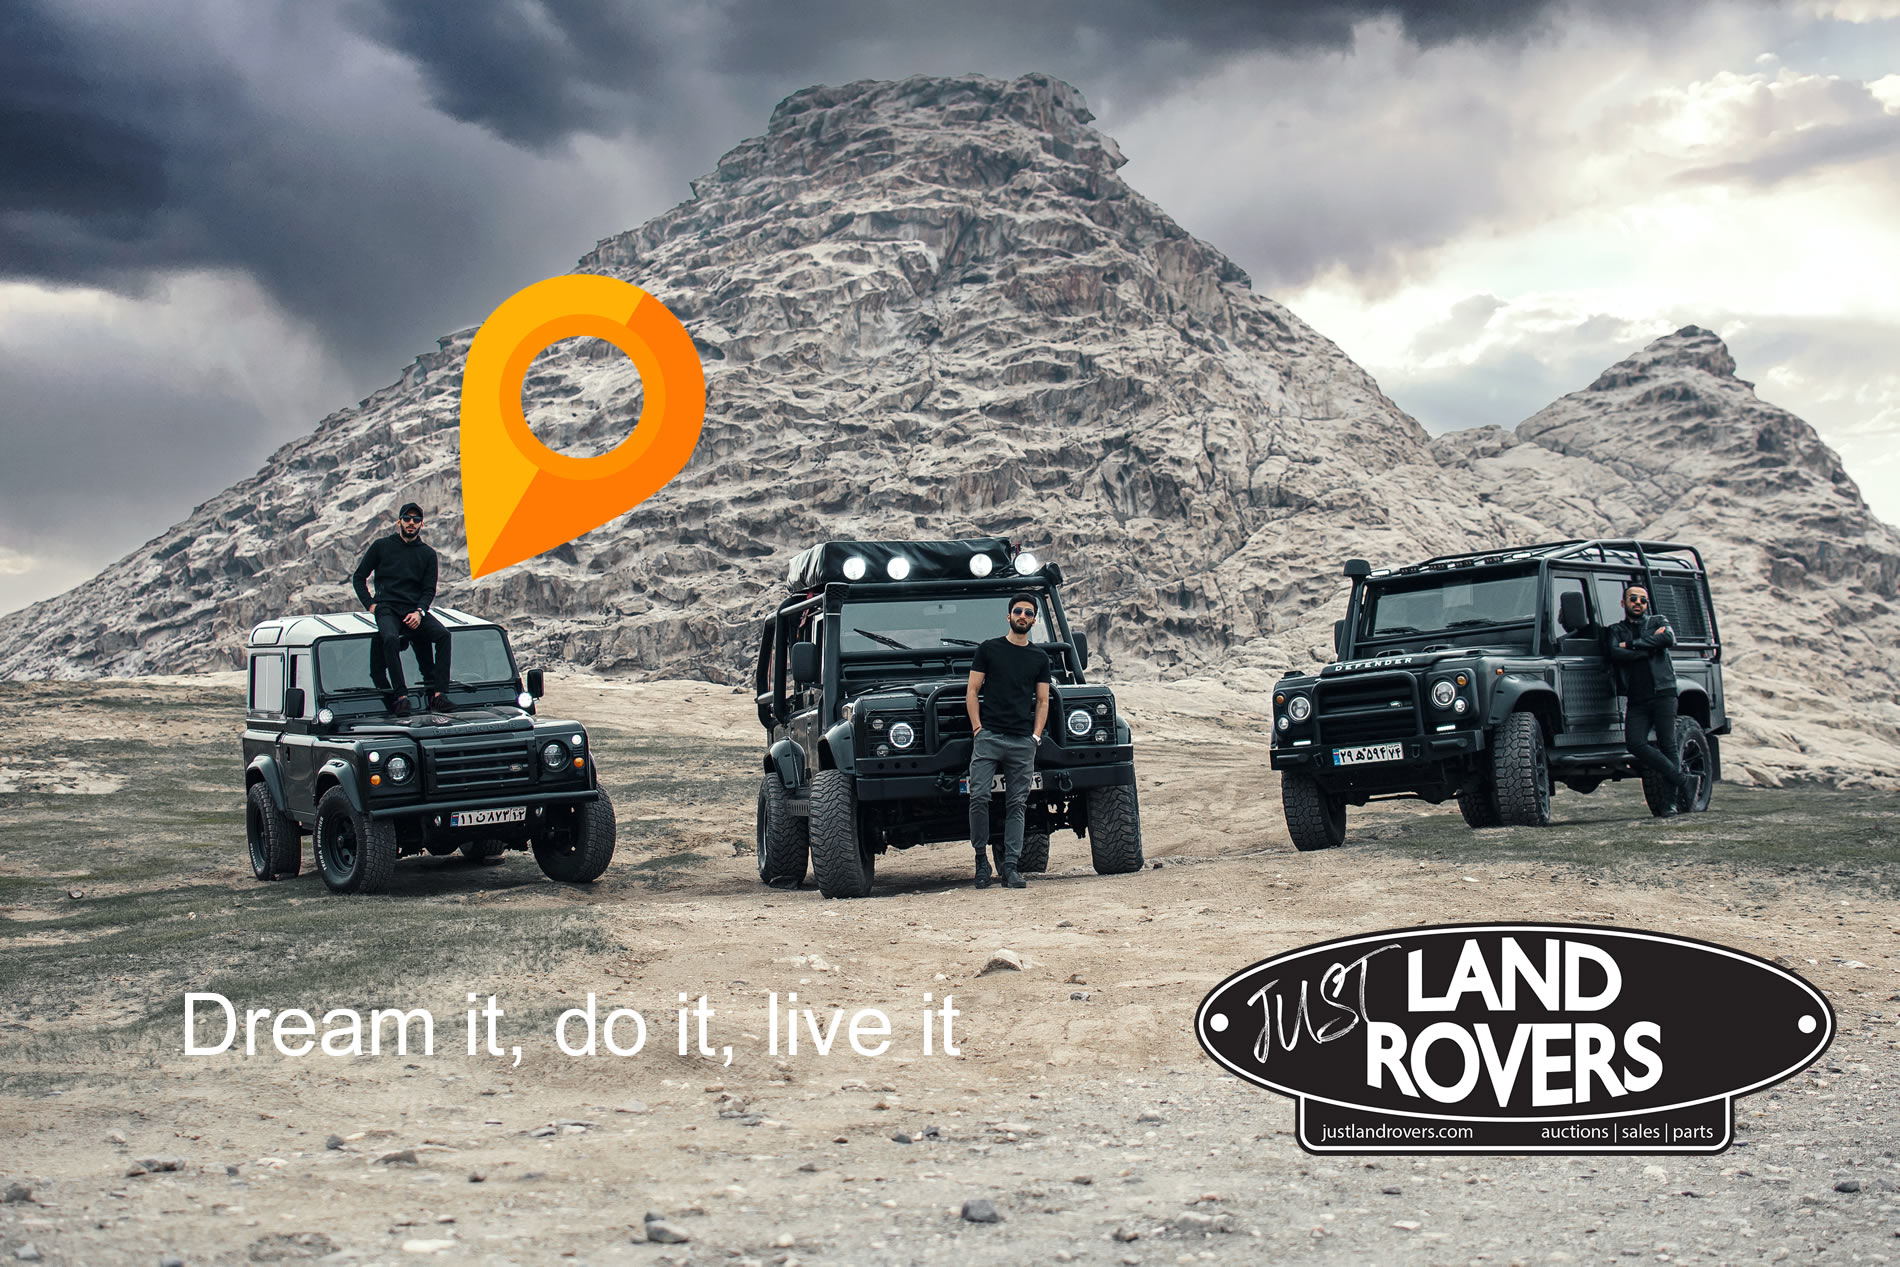 Welcome to Just Land Rovers